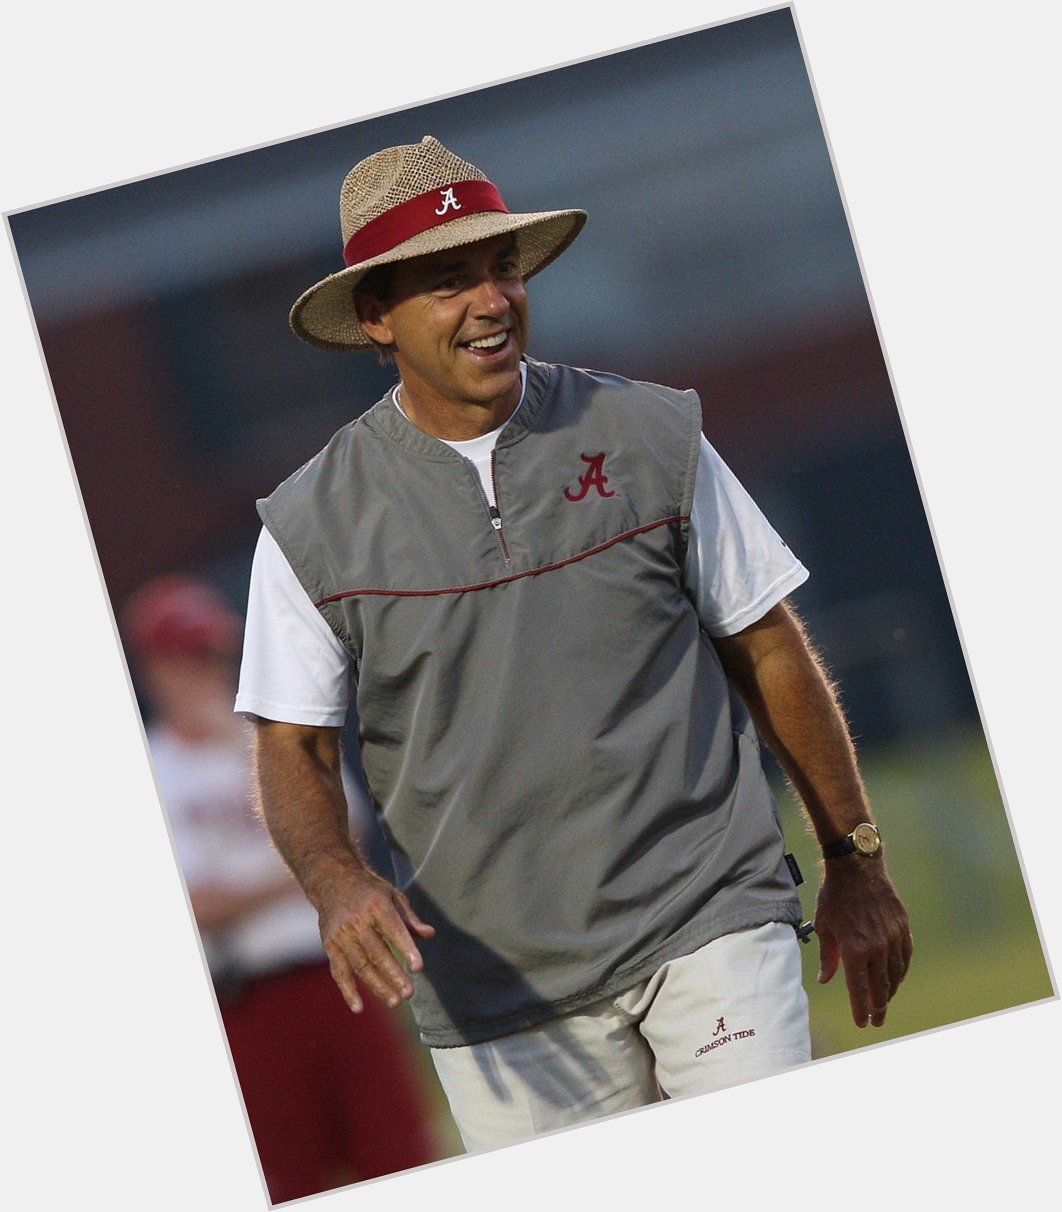 Happy birthday to the legend nick saban I\m am honored to have the same birthday as you 